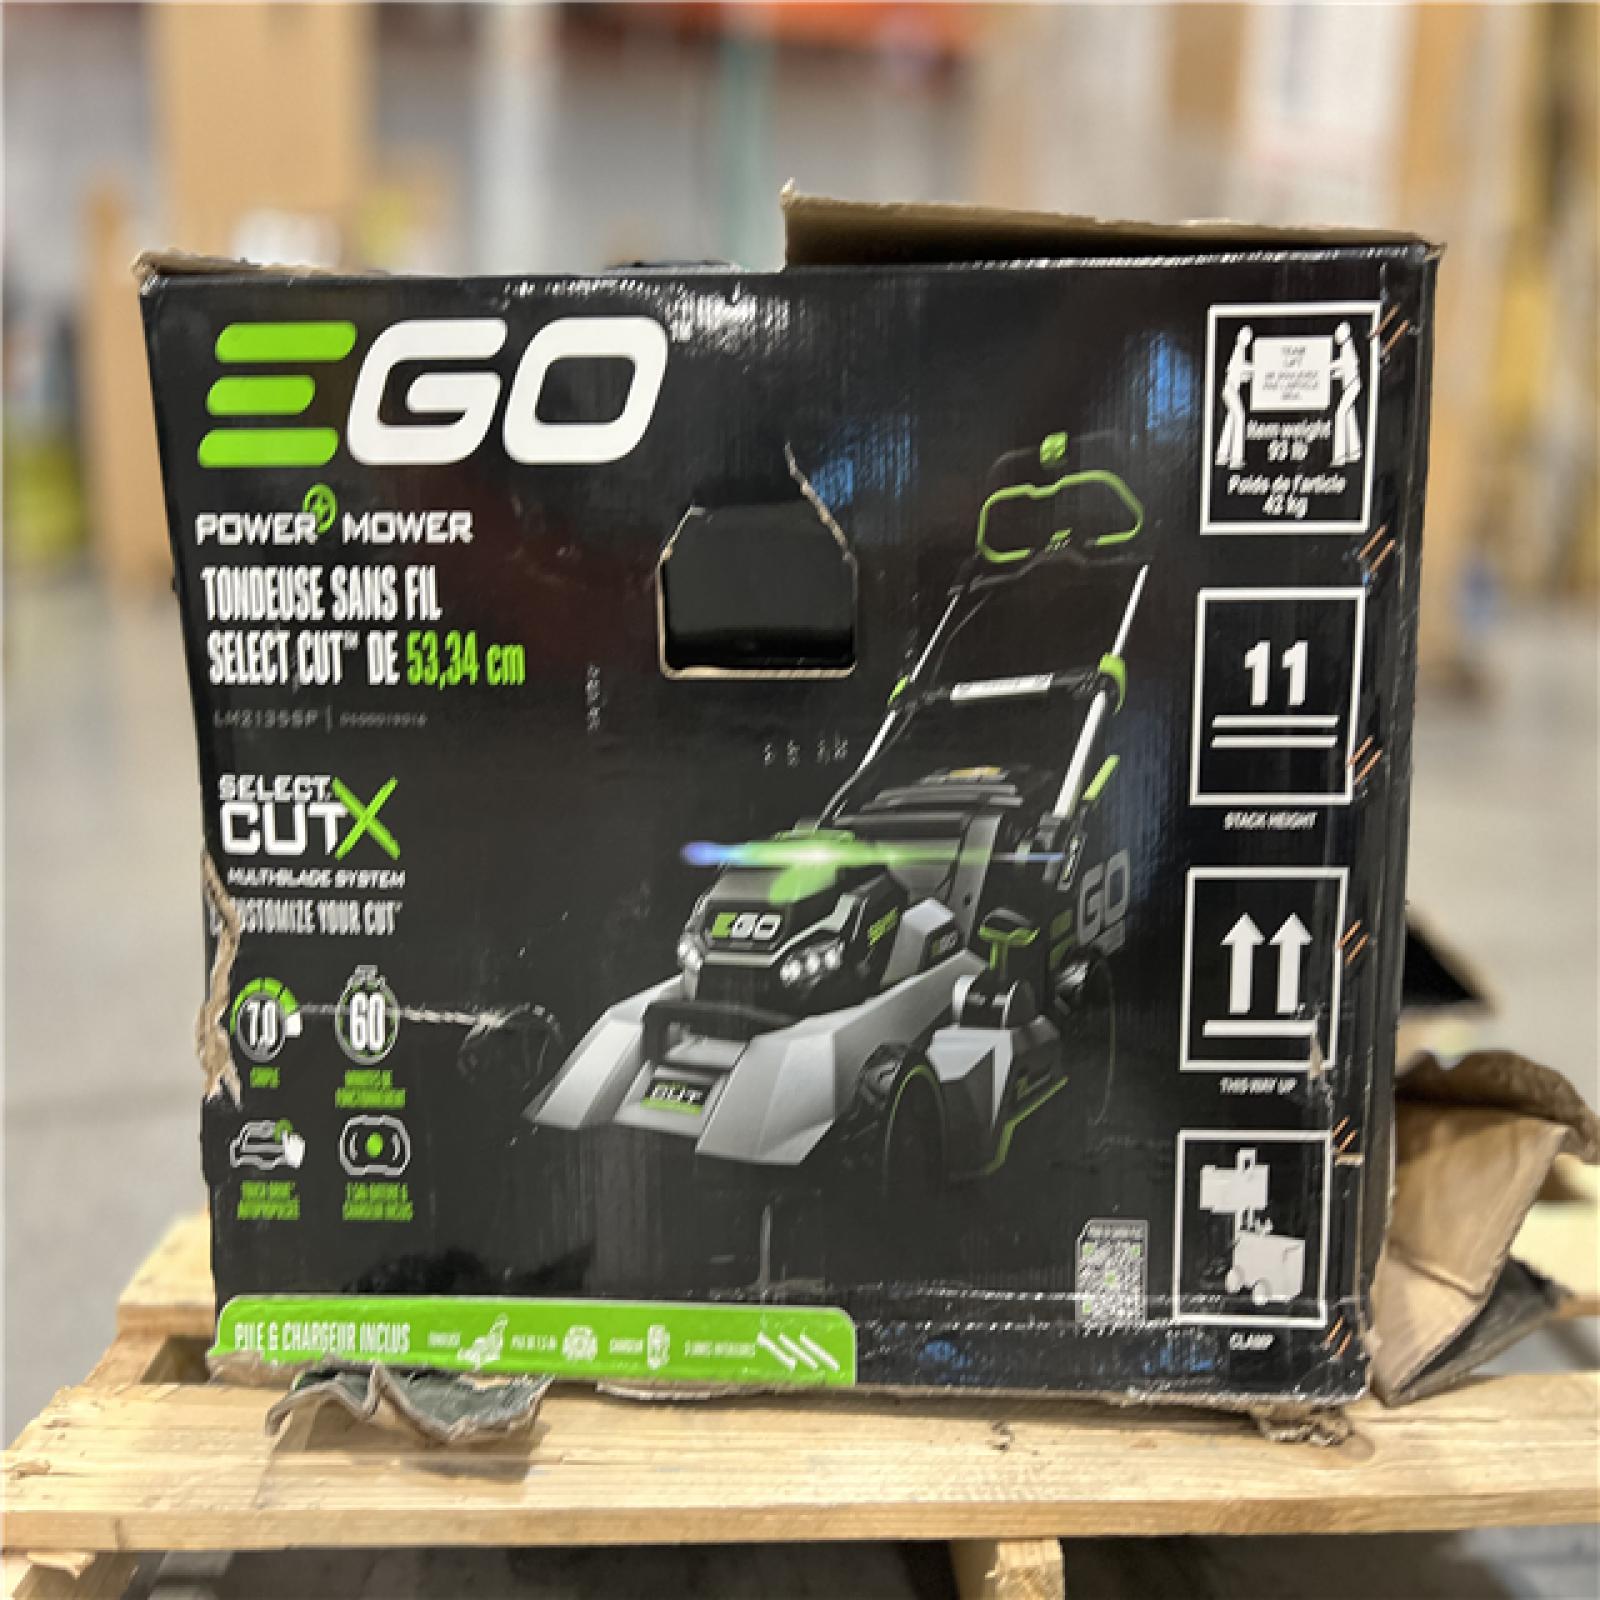 DALLAS LOCATION NEW!- EGO POWER+ Select Cut XP 56-volt 21-in Cordless Self-propelled Lawn Mower 10 Ah (1-Battery and Charger Included)